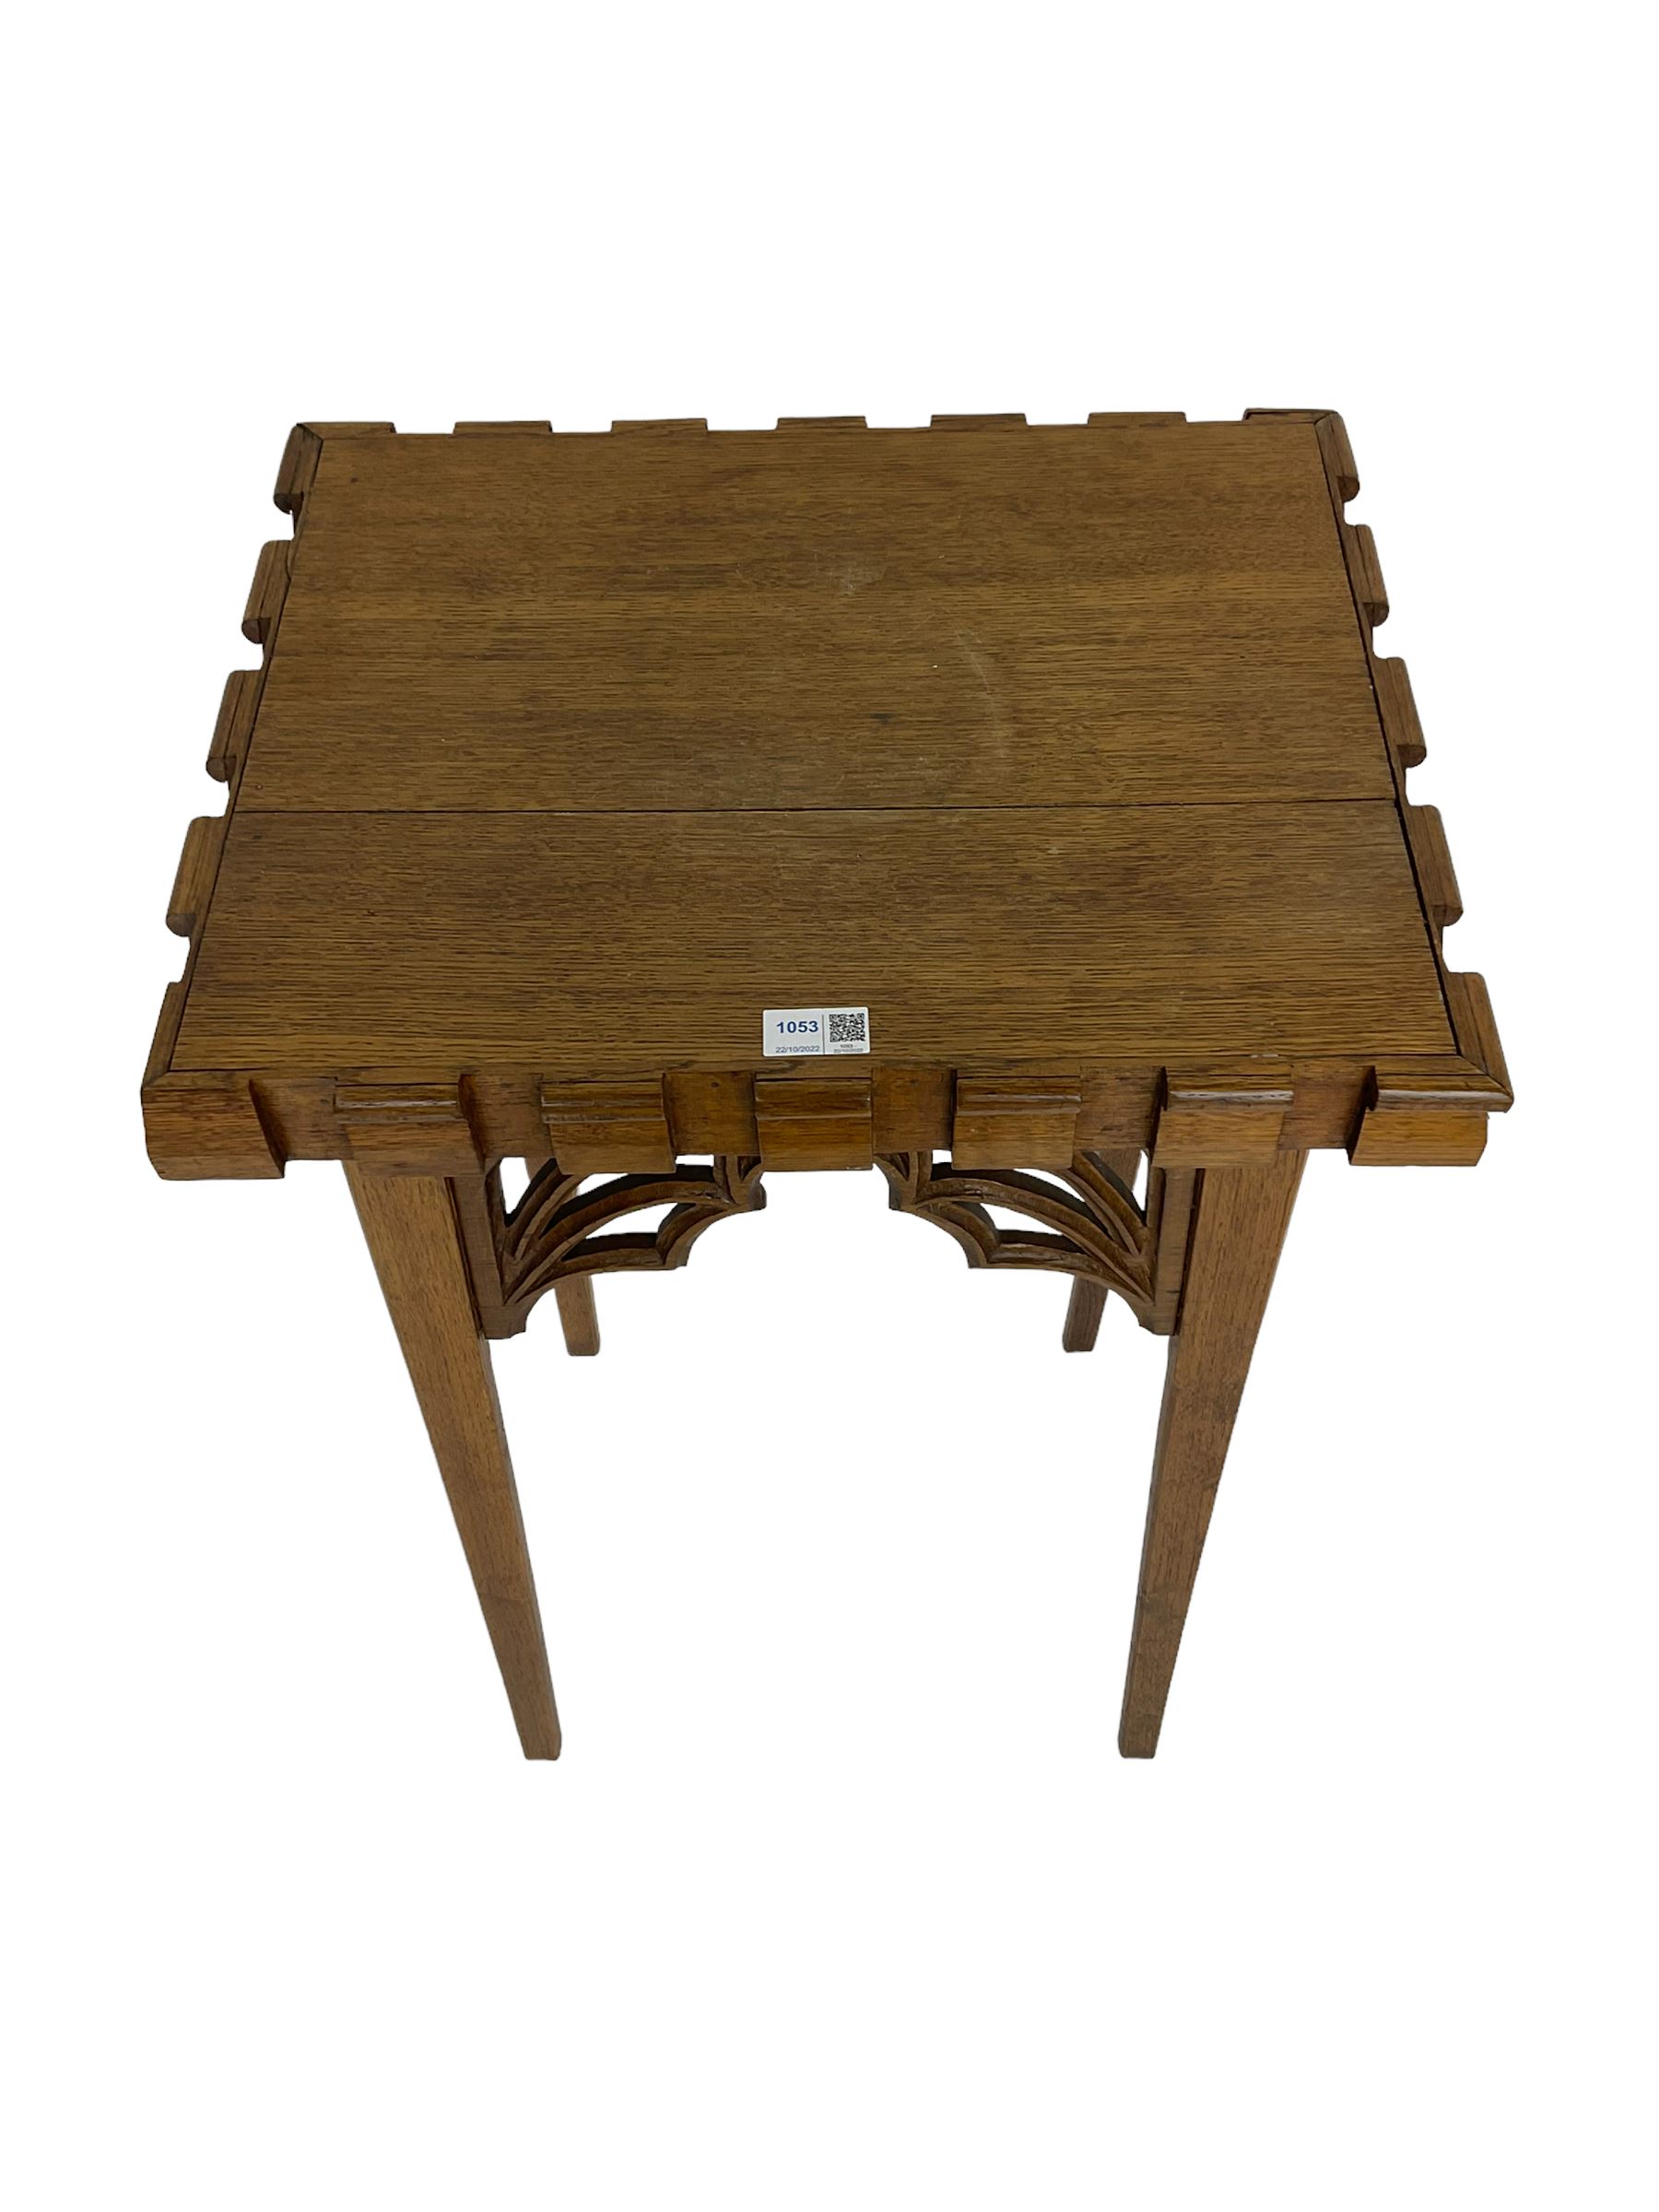 20th century ecclesiastical Gothic style oak stand - Image 5 of 6